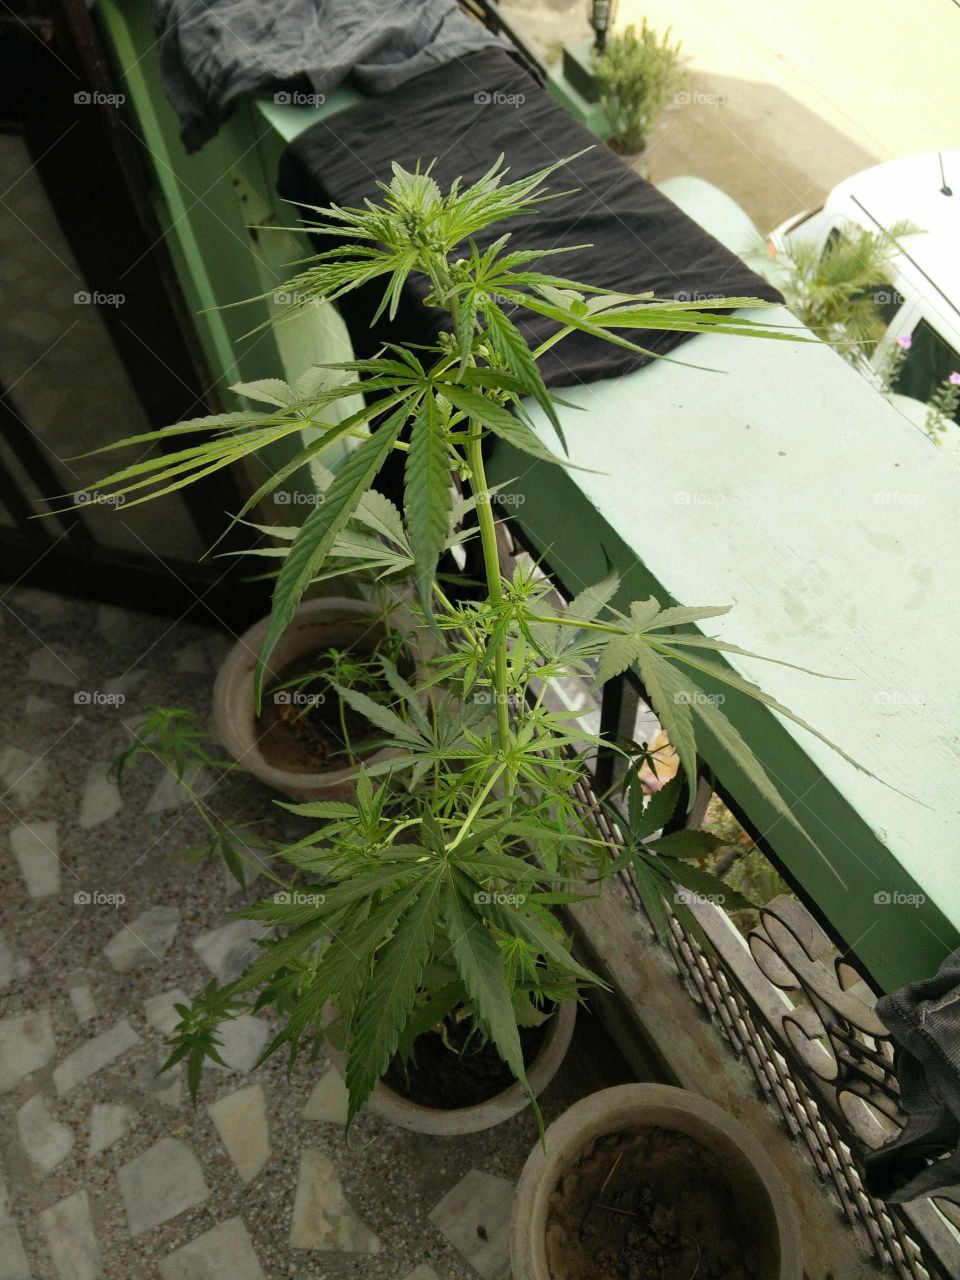 Weed (Cannabis) plant